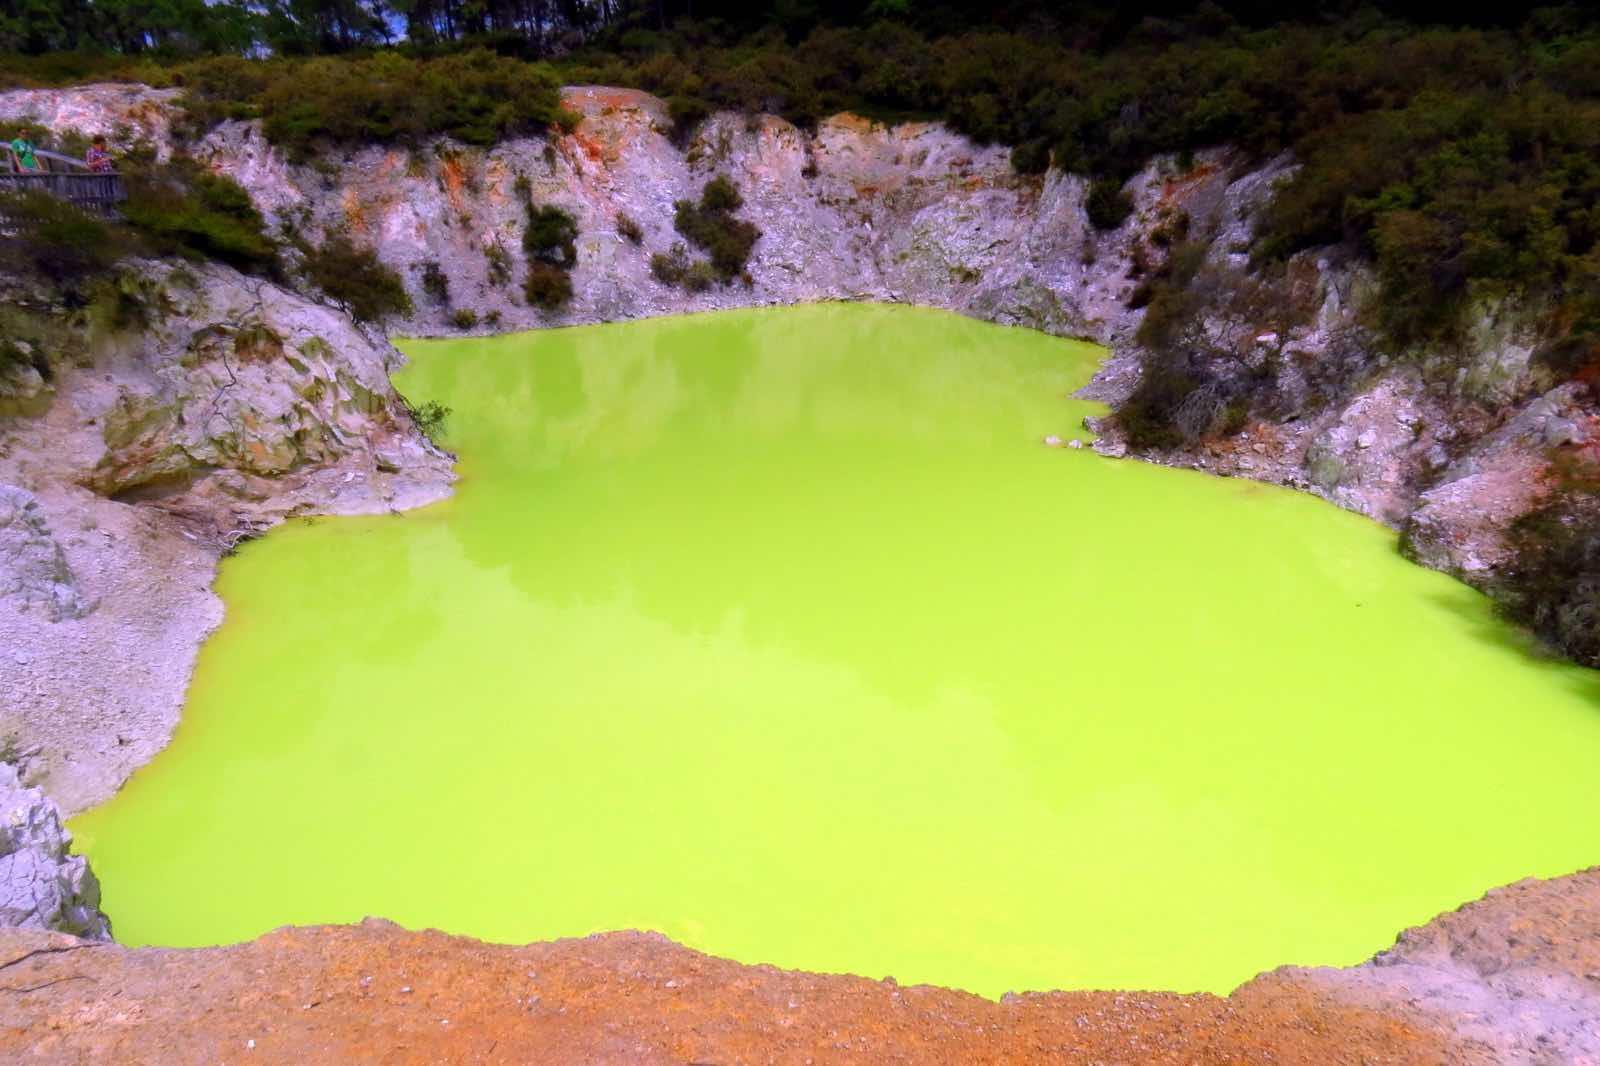 Colourful yet toxic water pond